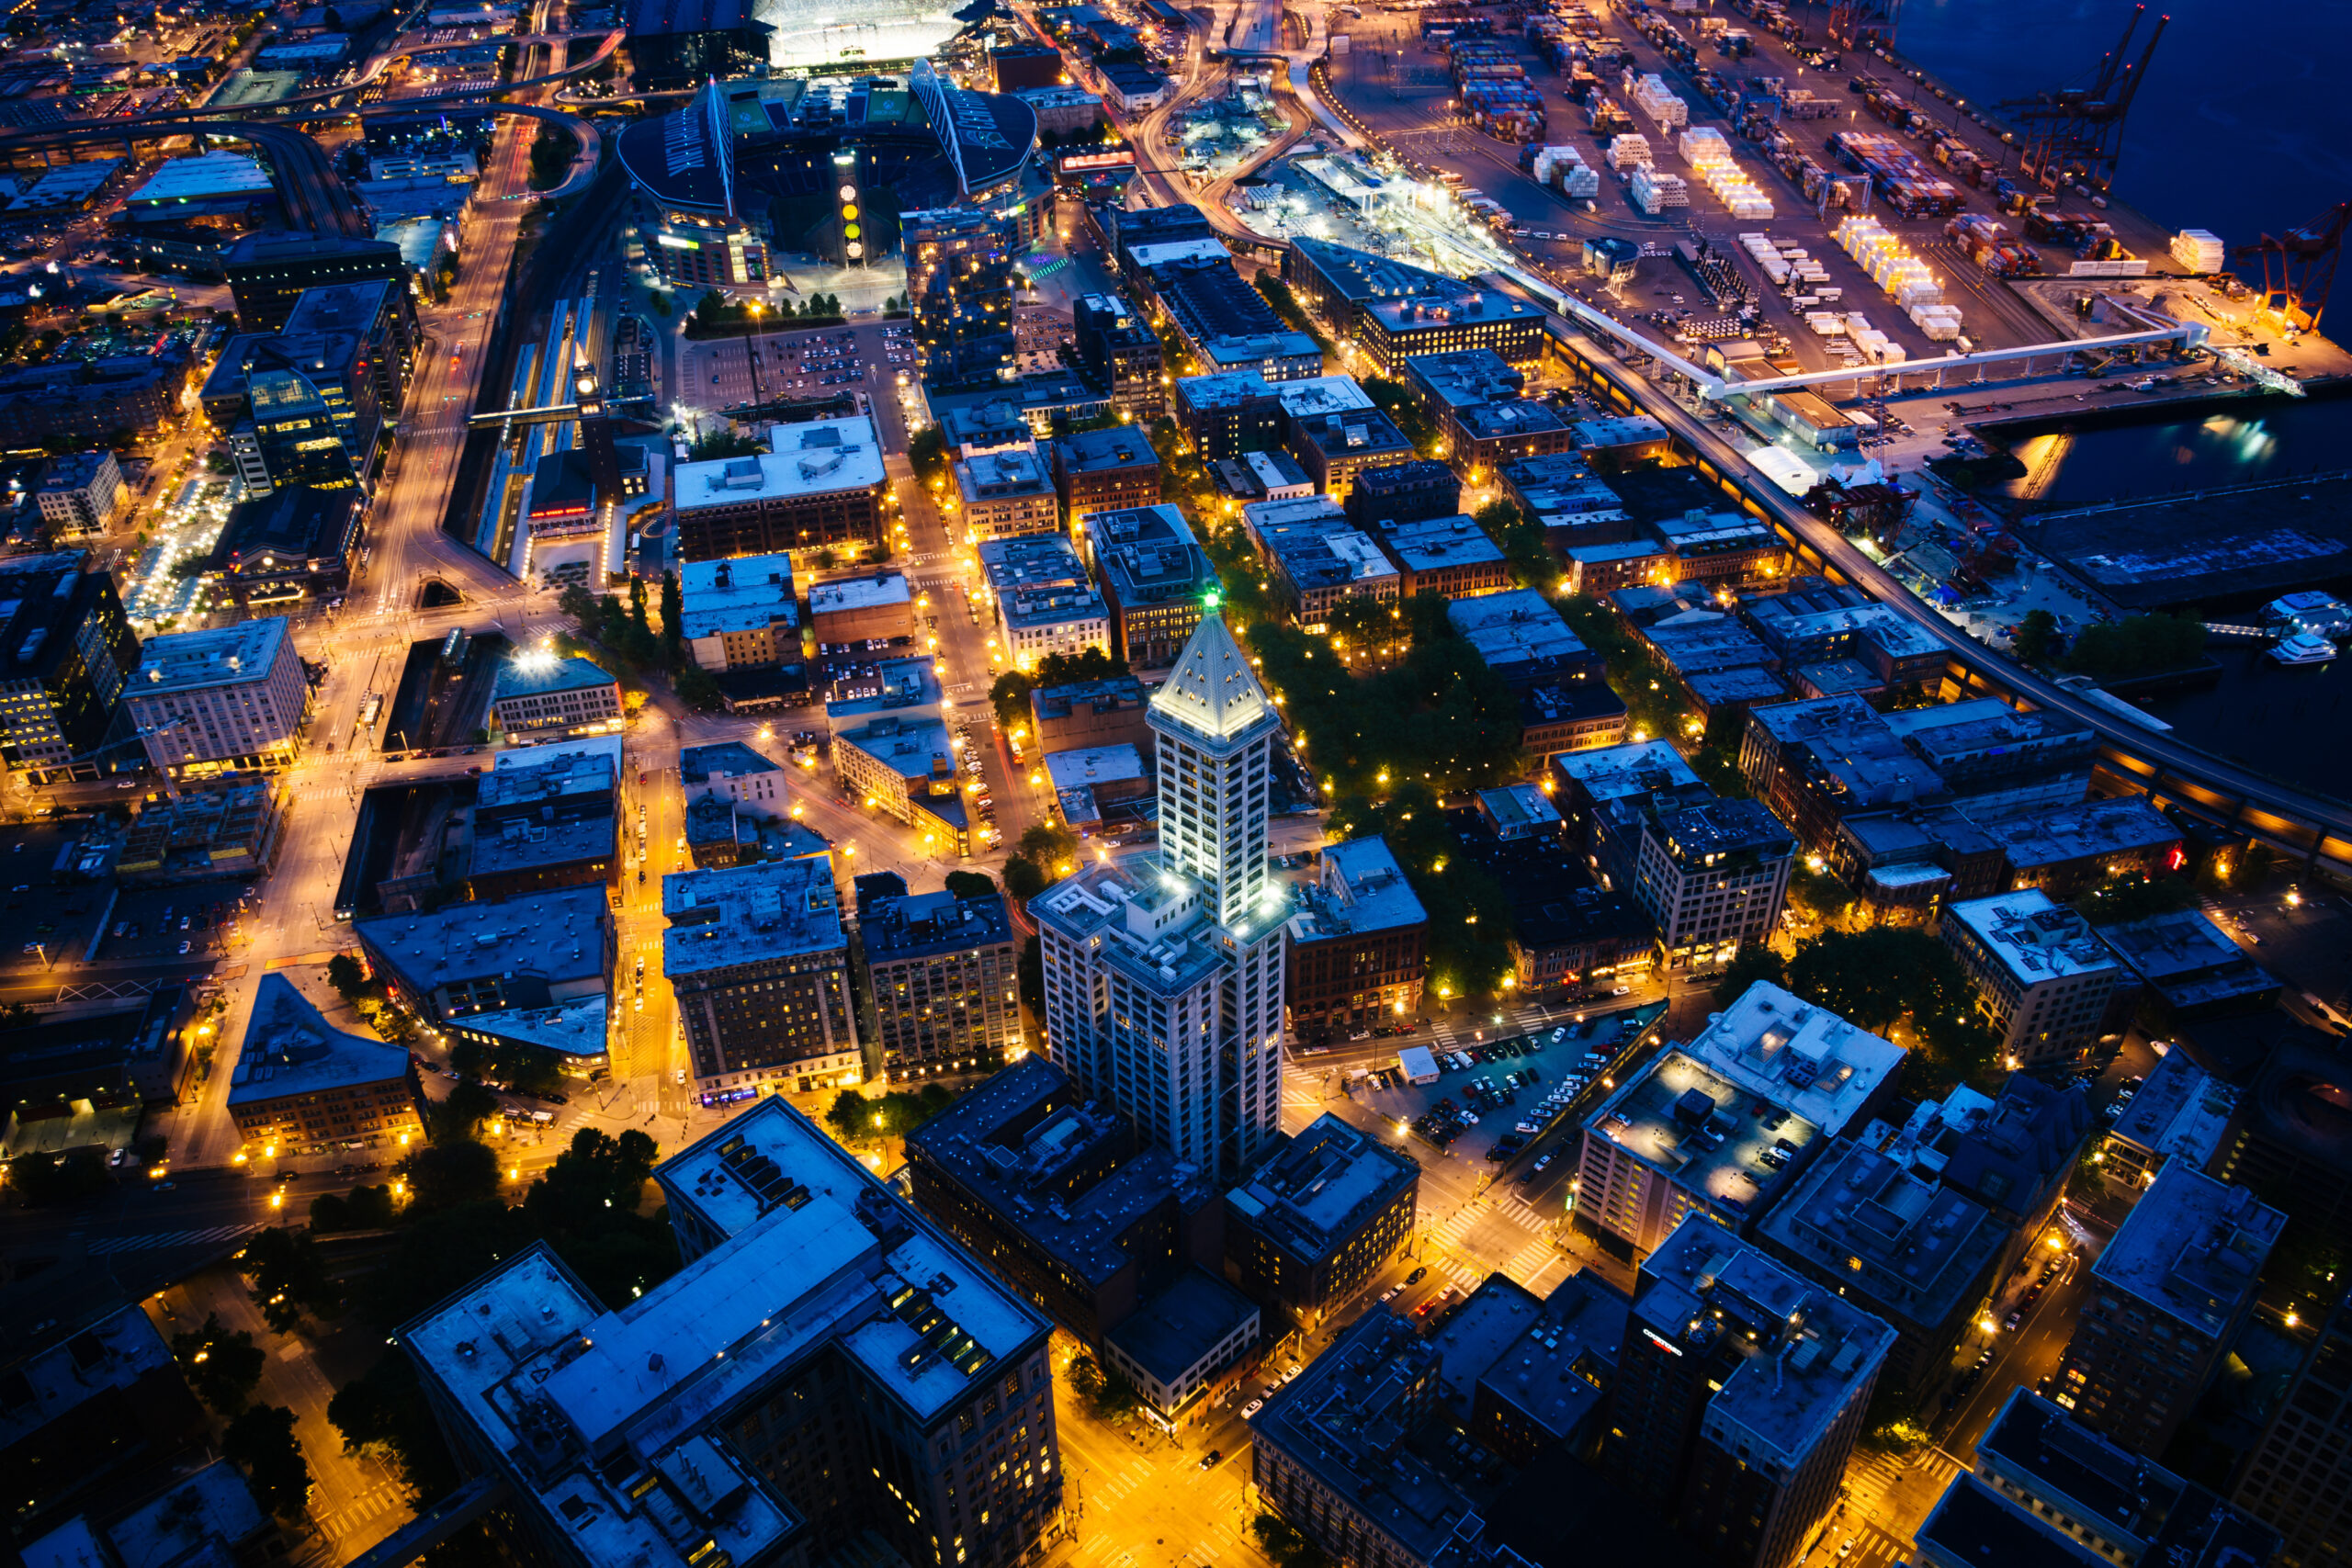 View of the Pioneer Square area at night, in Seattle, Washington